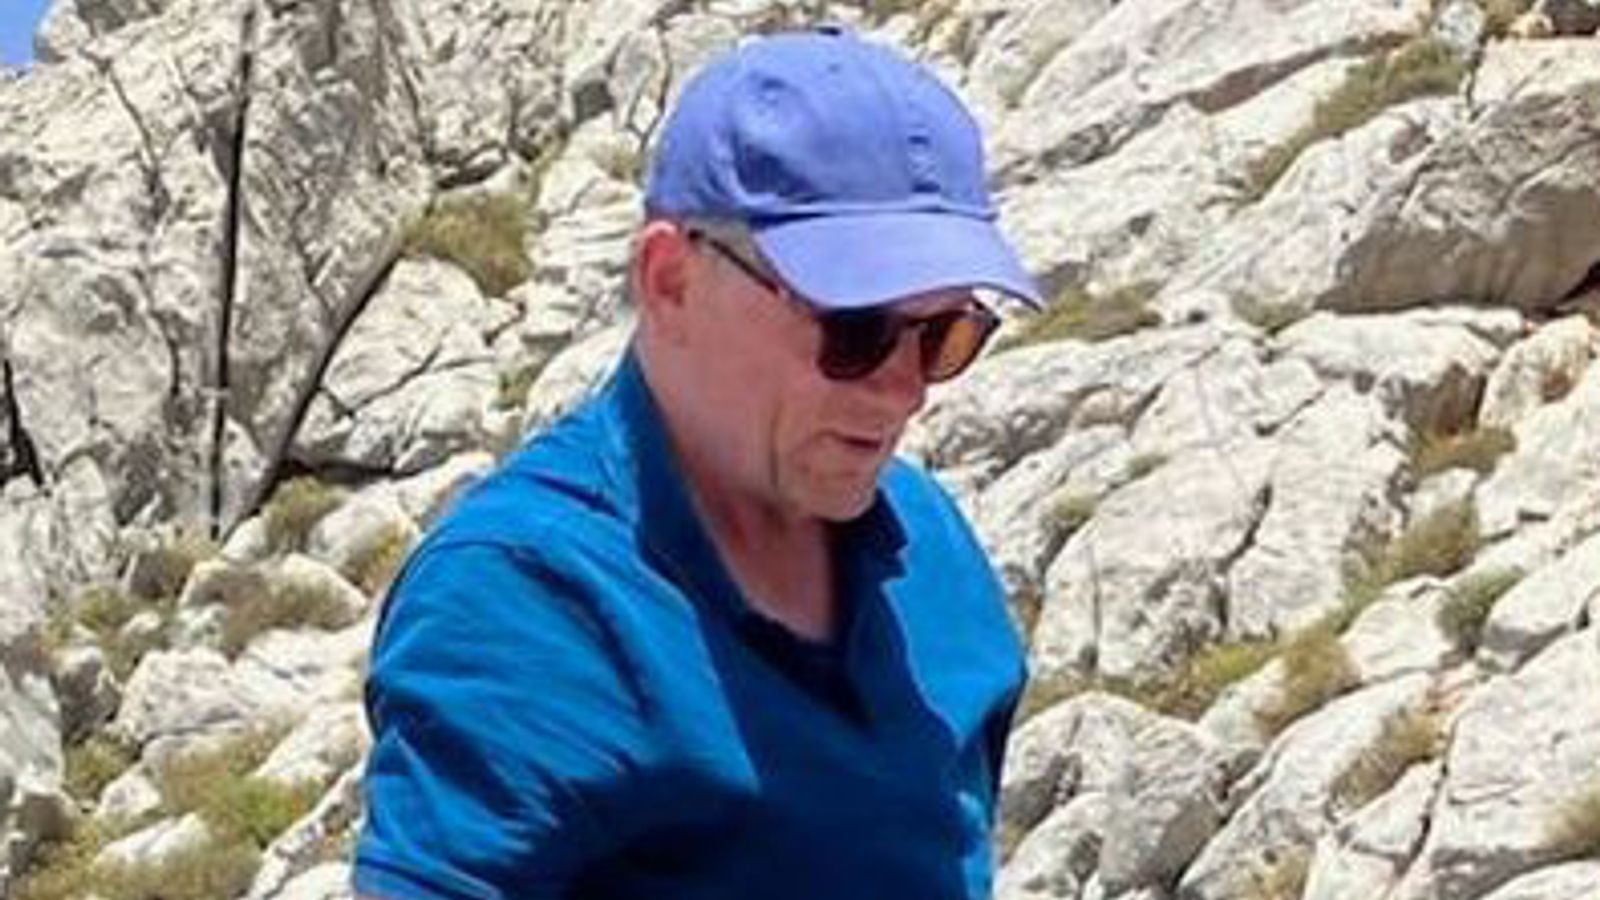 Michael Mosley: More officers to join search for TV doctor on Greek island as his disappearance is described as 'strange'